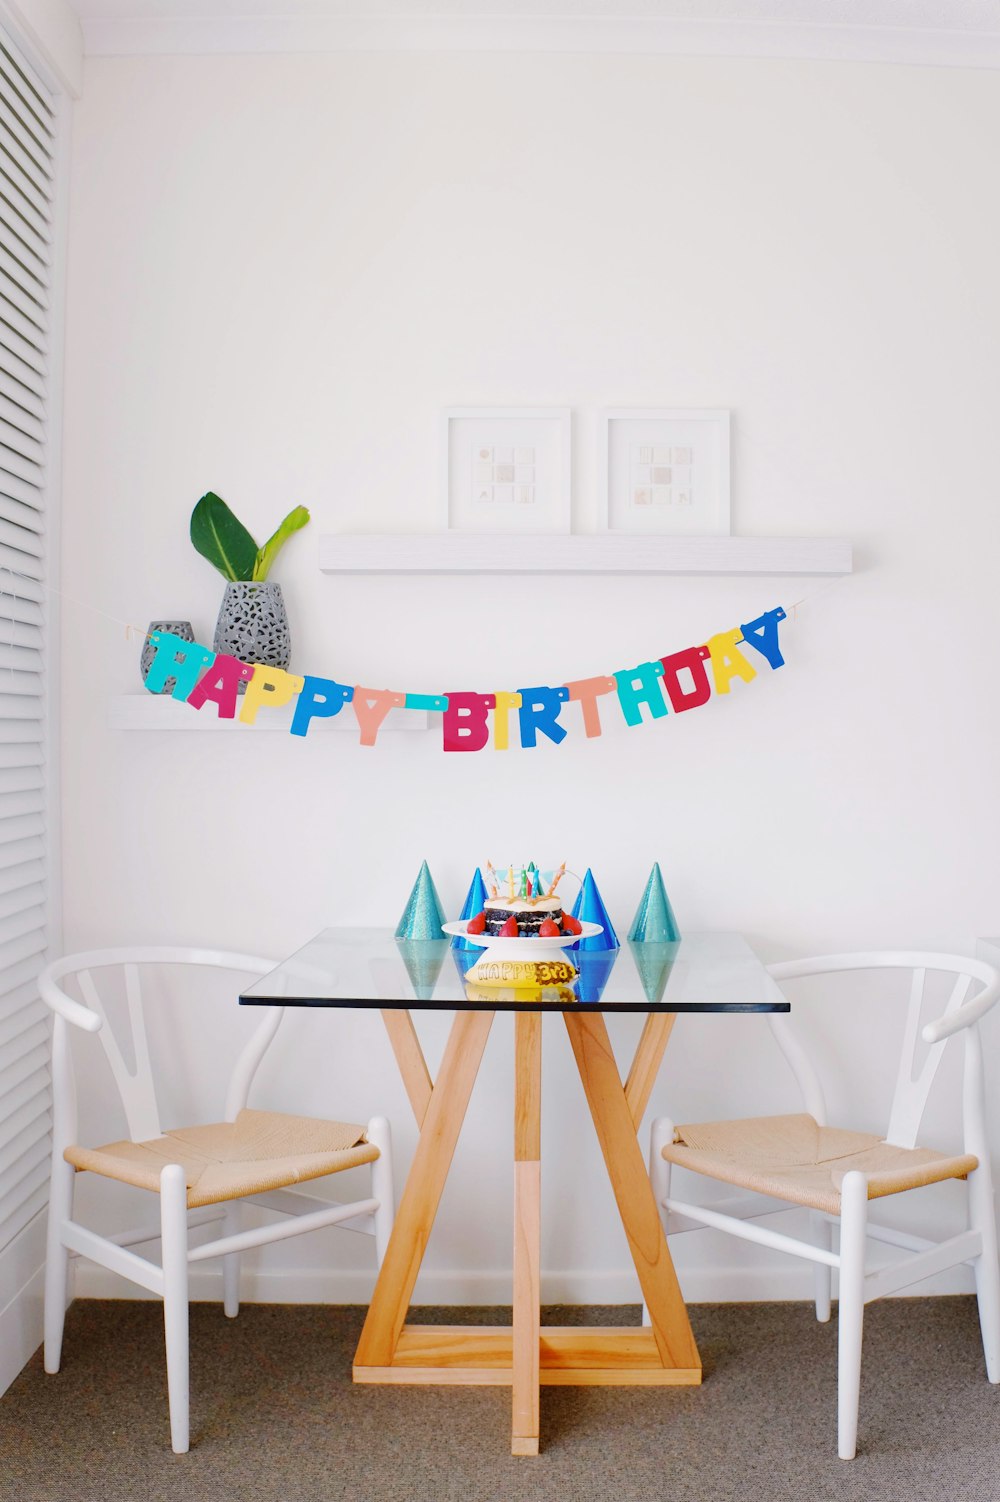 Birthday Table Pictures | Download Free Images on Unsplash